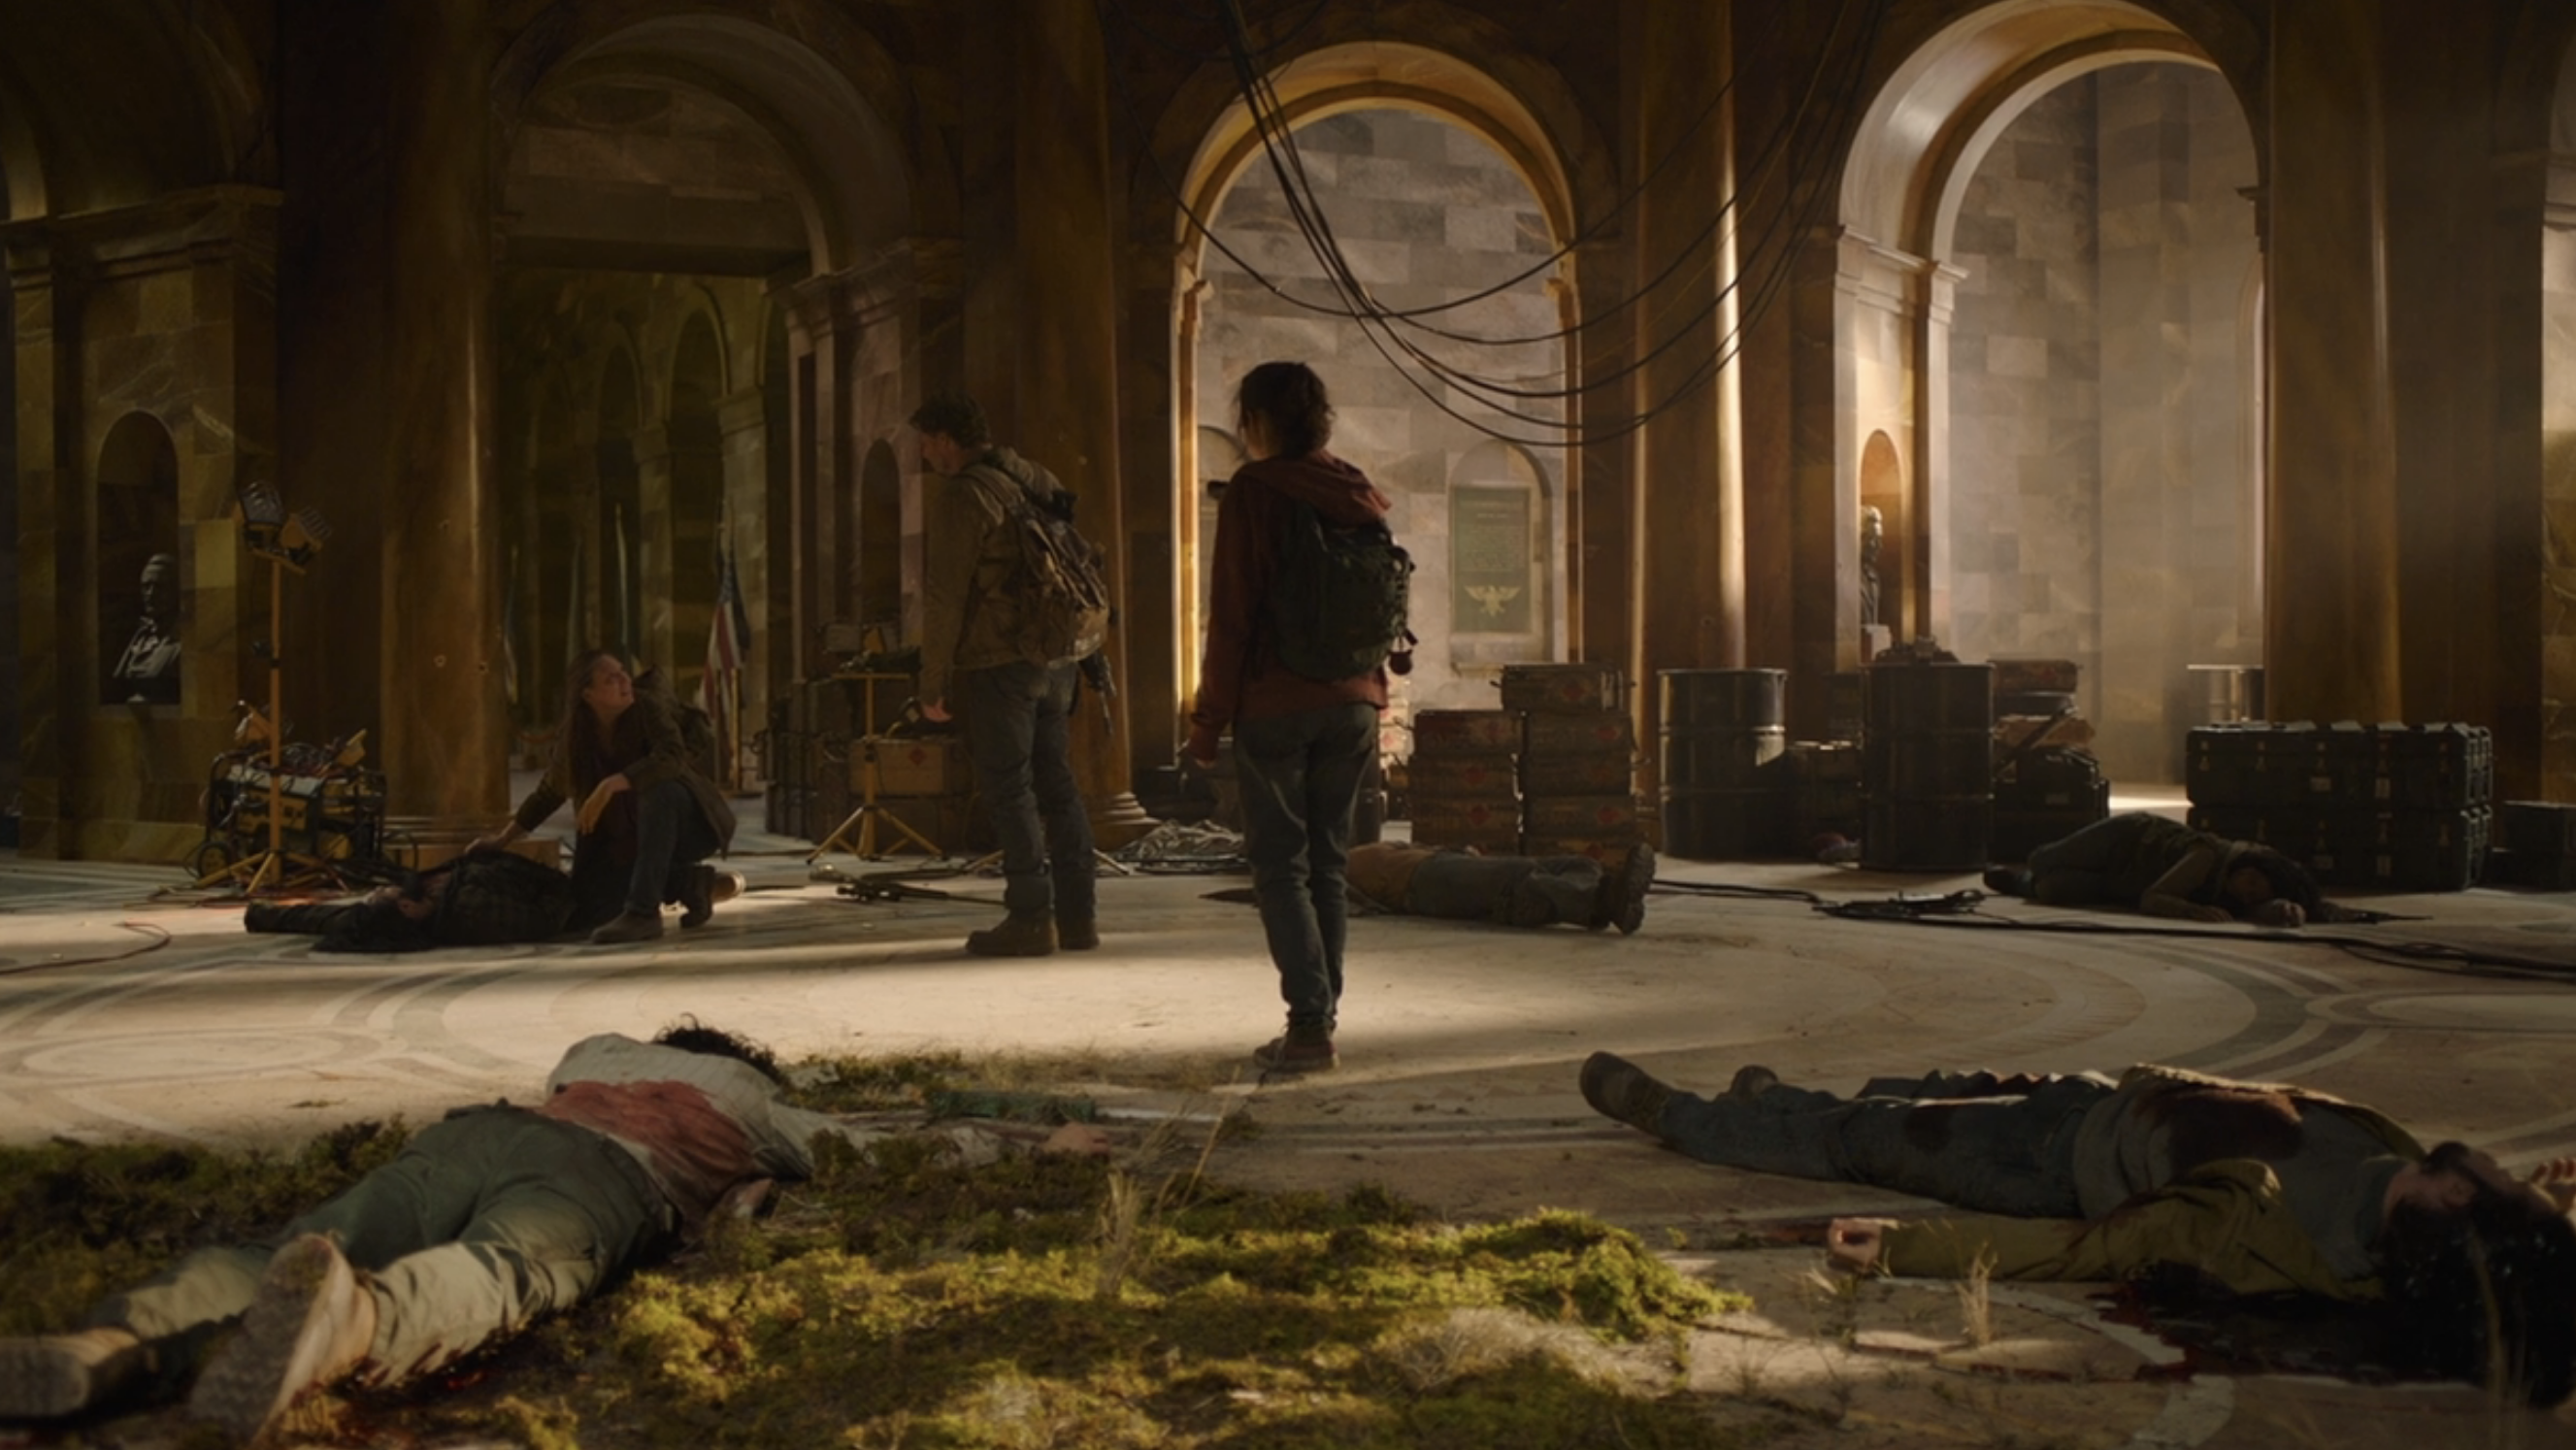 Joel and Ellie walking through a room with bodies strewn about the floor